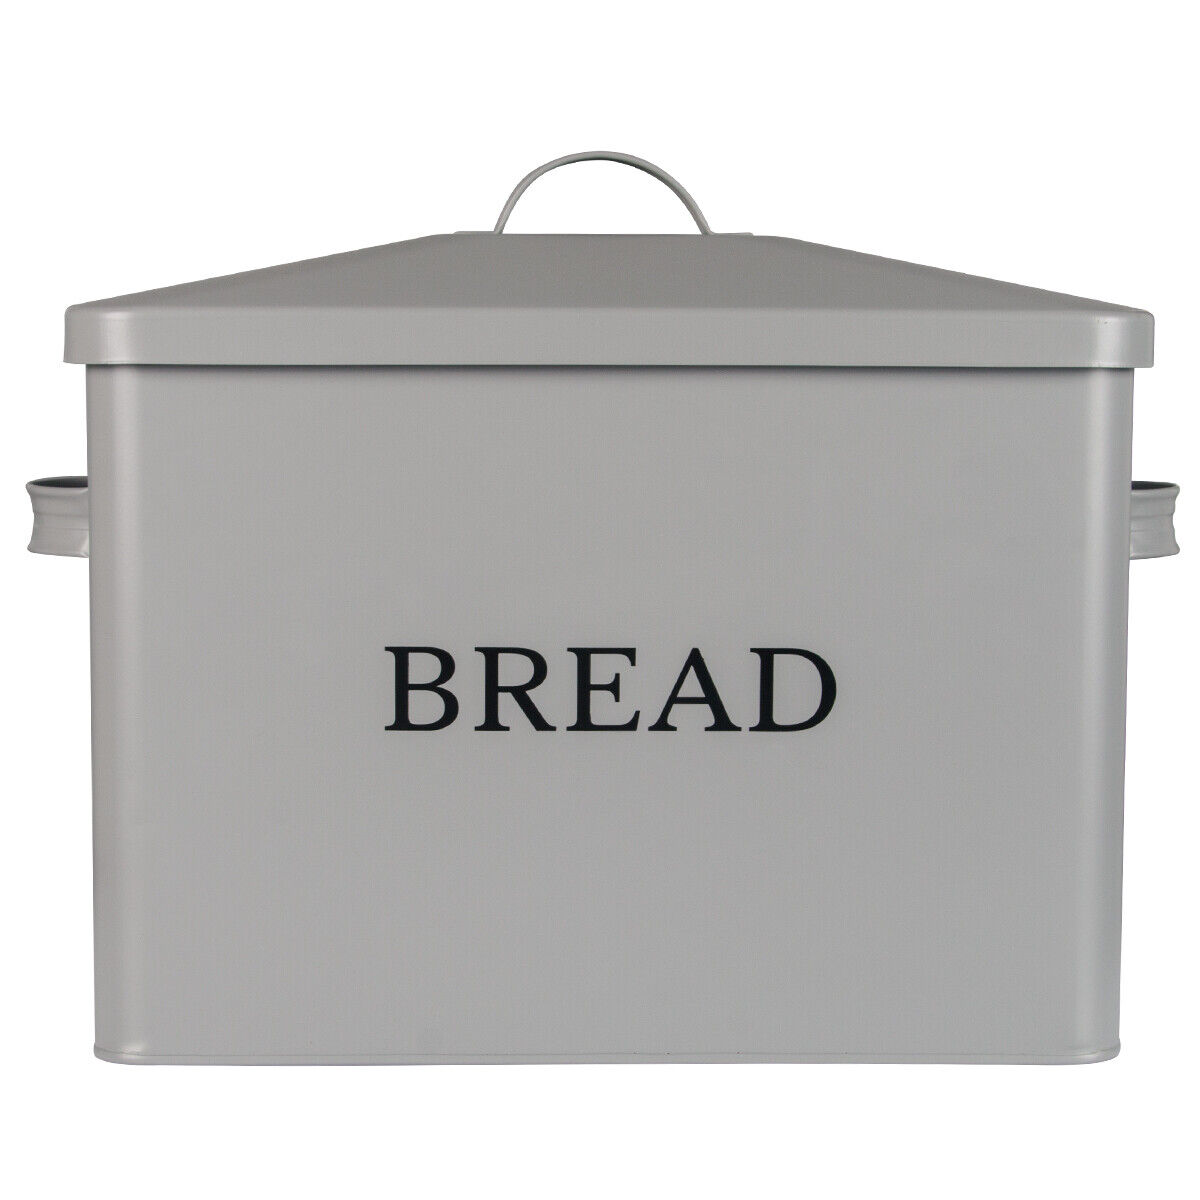 Bread Box Kitchen Countertop Large Stainless Steel Breadbox Food Cake Container